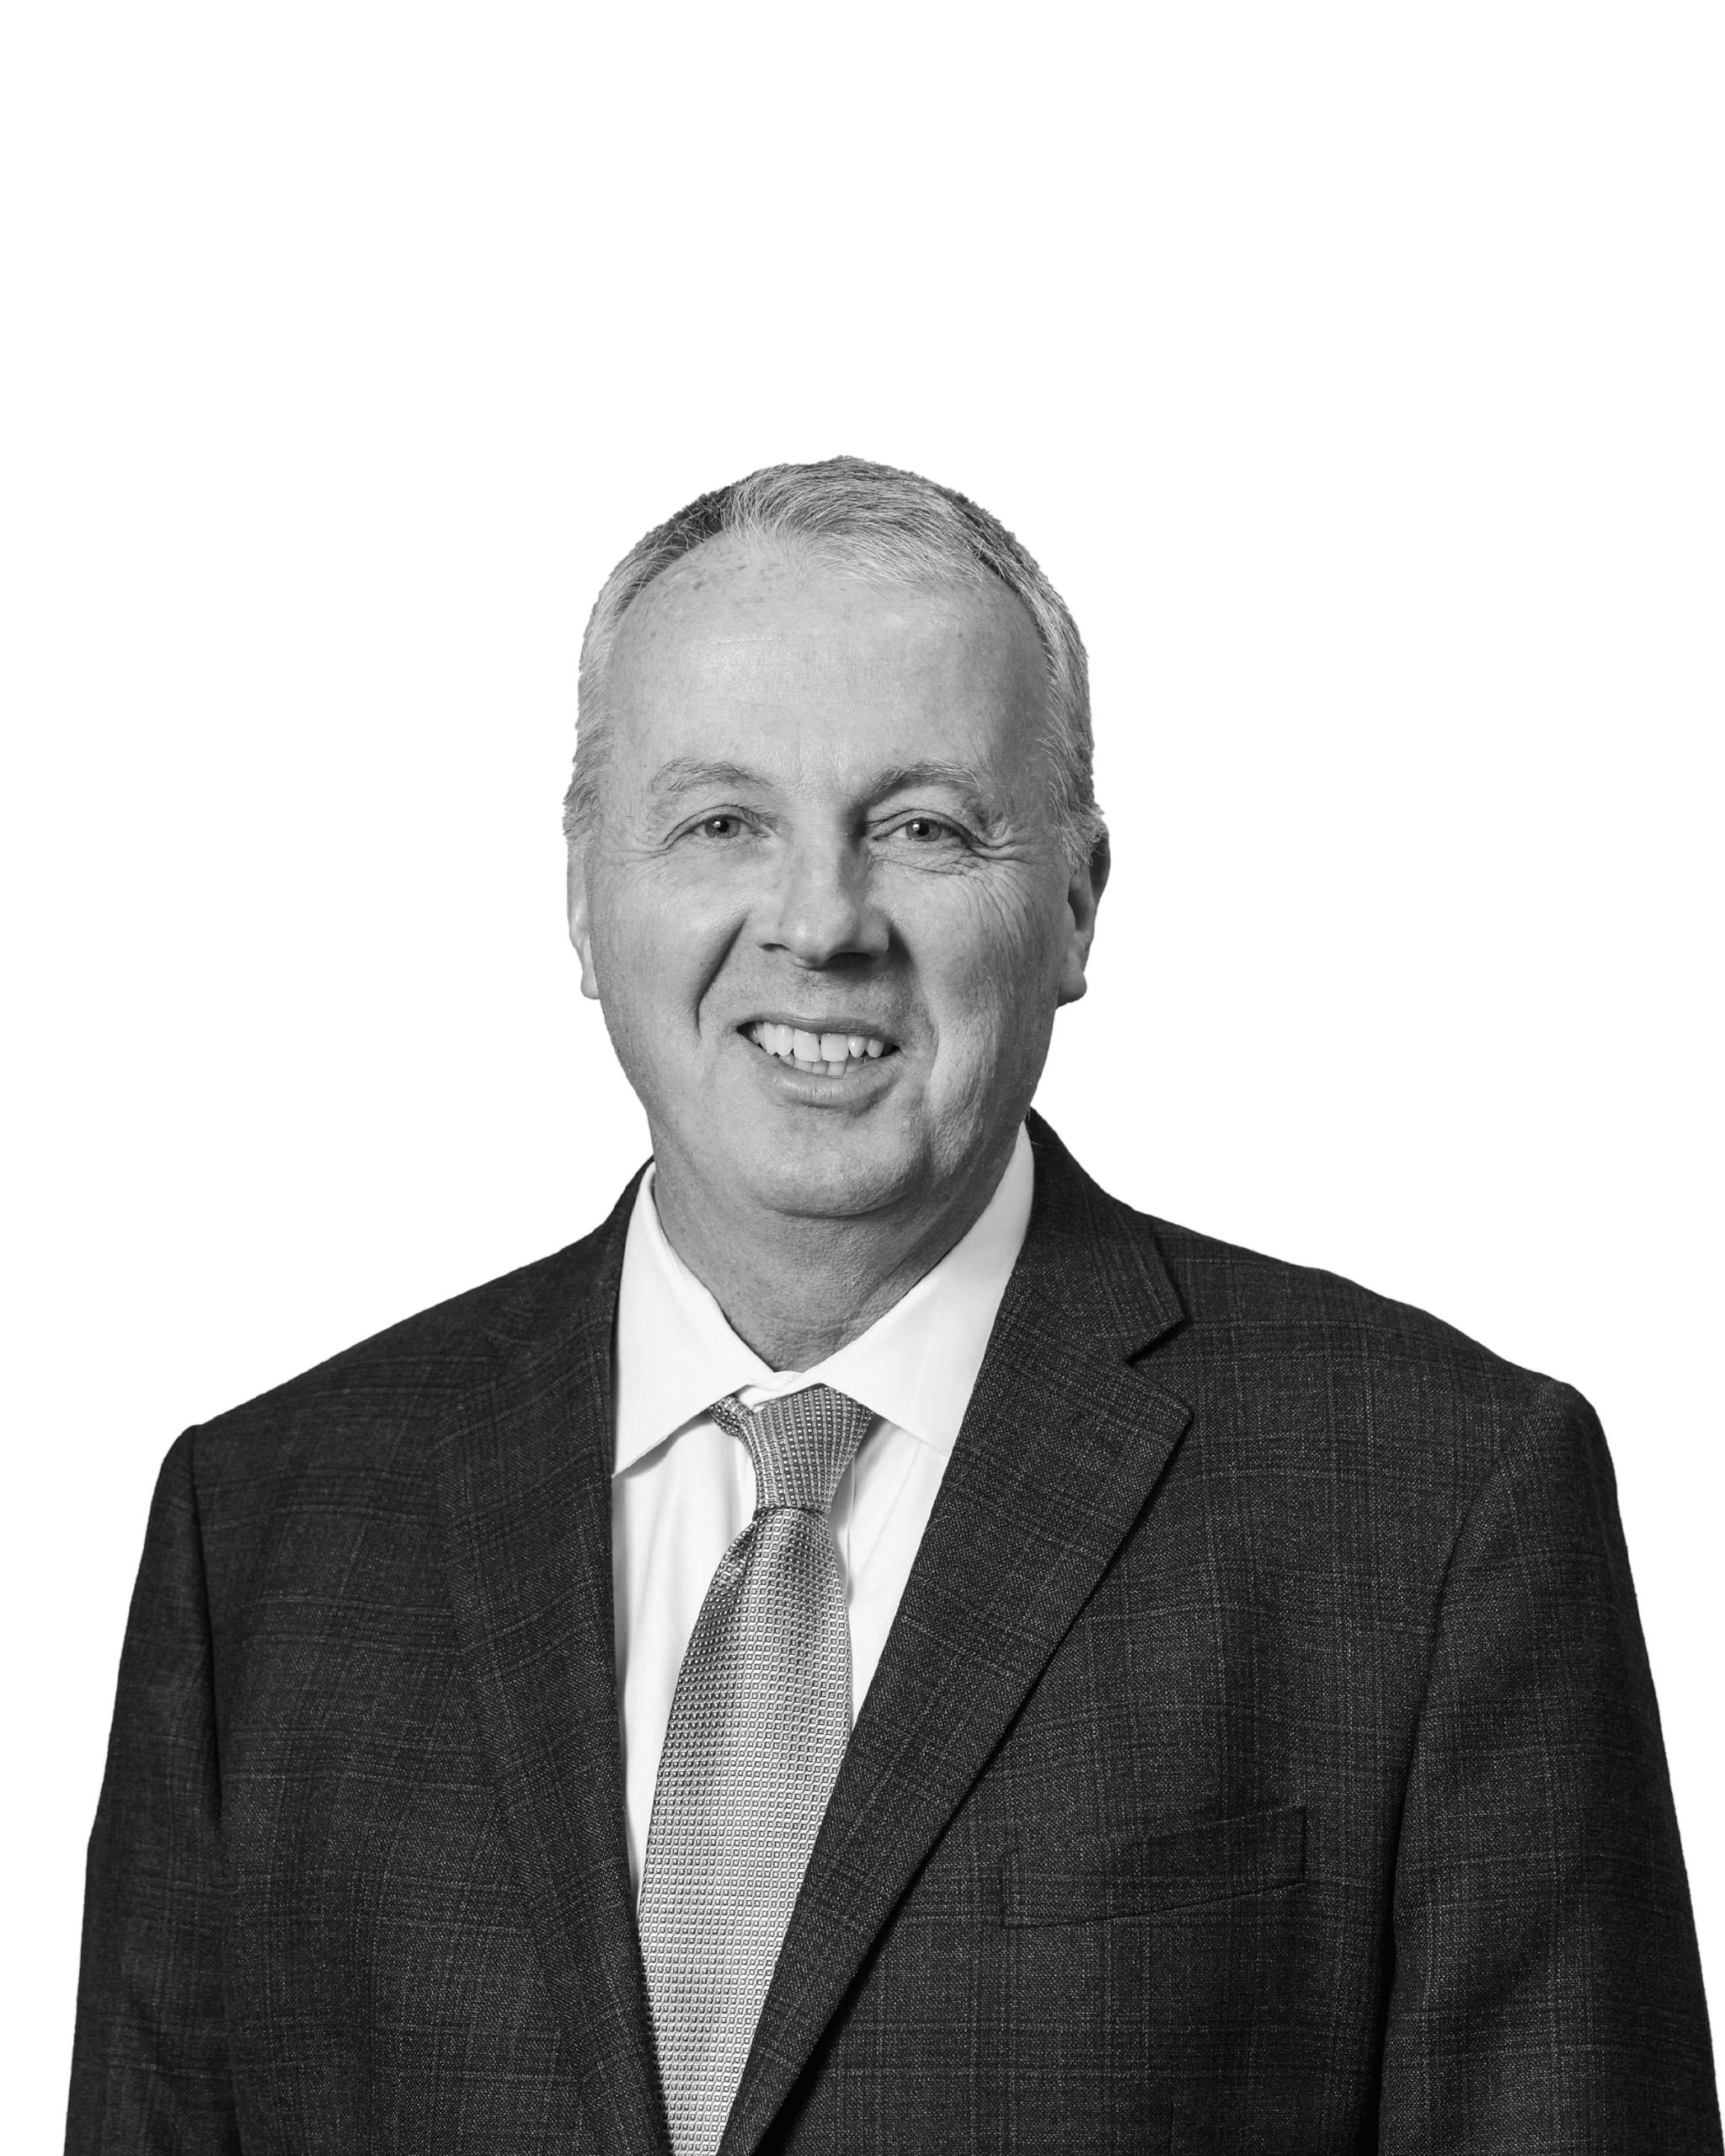 Gary Wilson is the Manager Director of Accounting at Valor